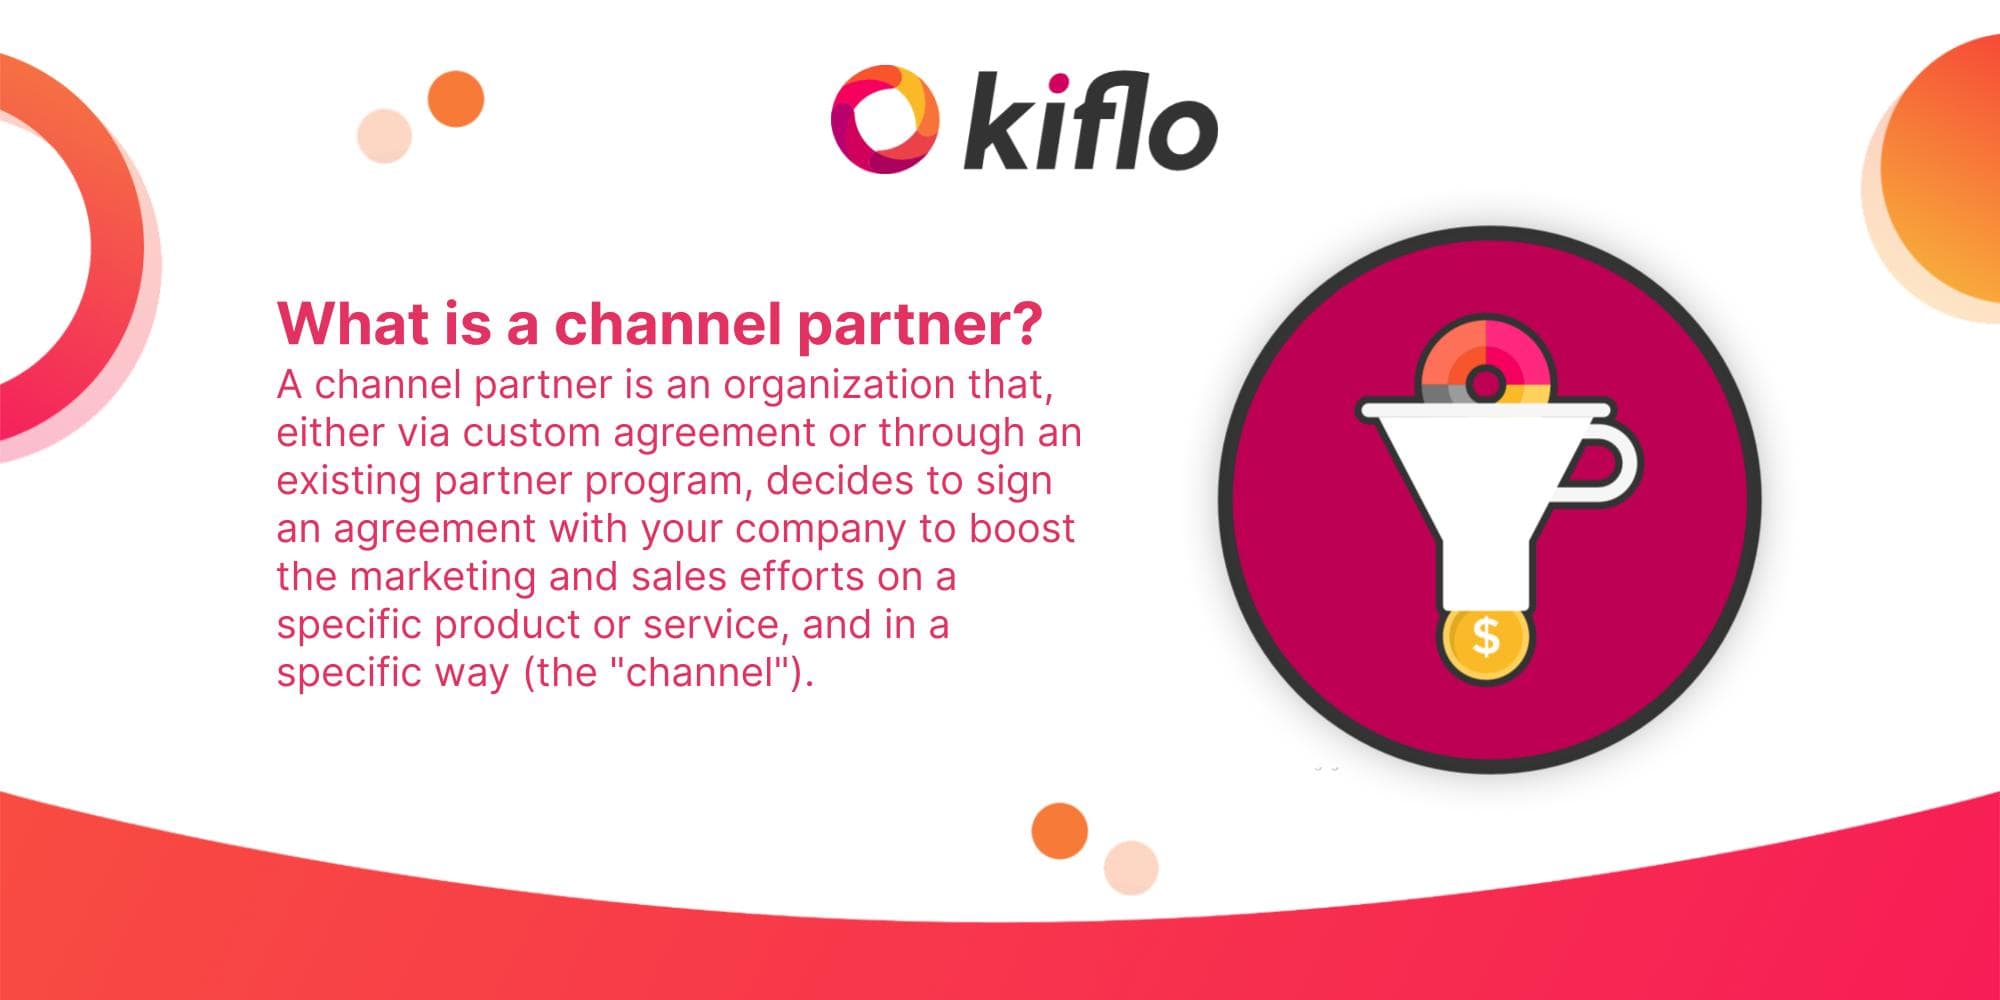 kiflo what is a channel partner illustration types